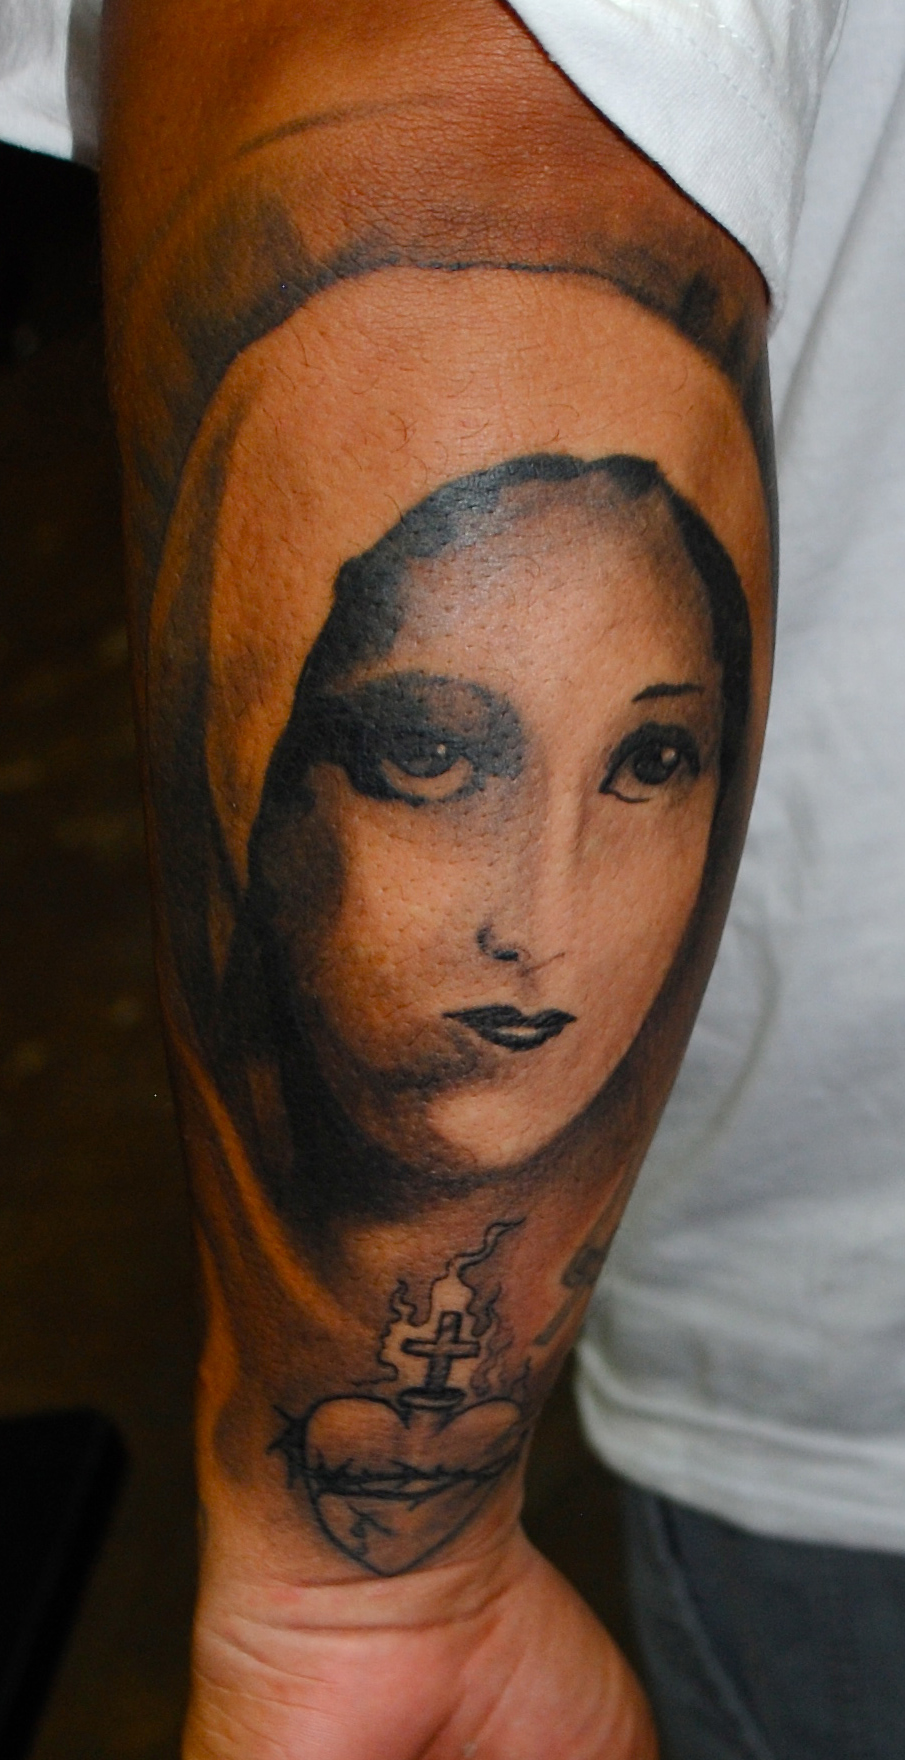 Virgin Mary Tattoos Designs, Ideas and Meaning | Tattoos For You